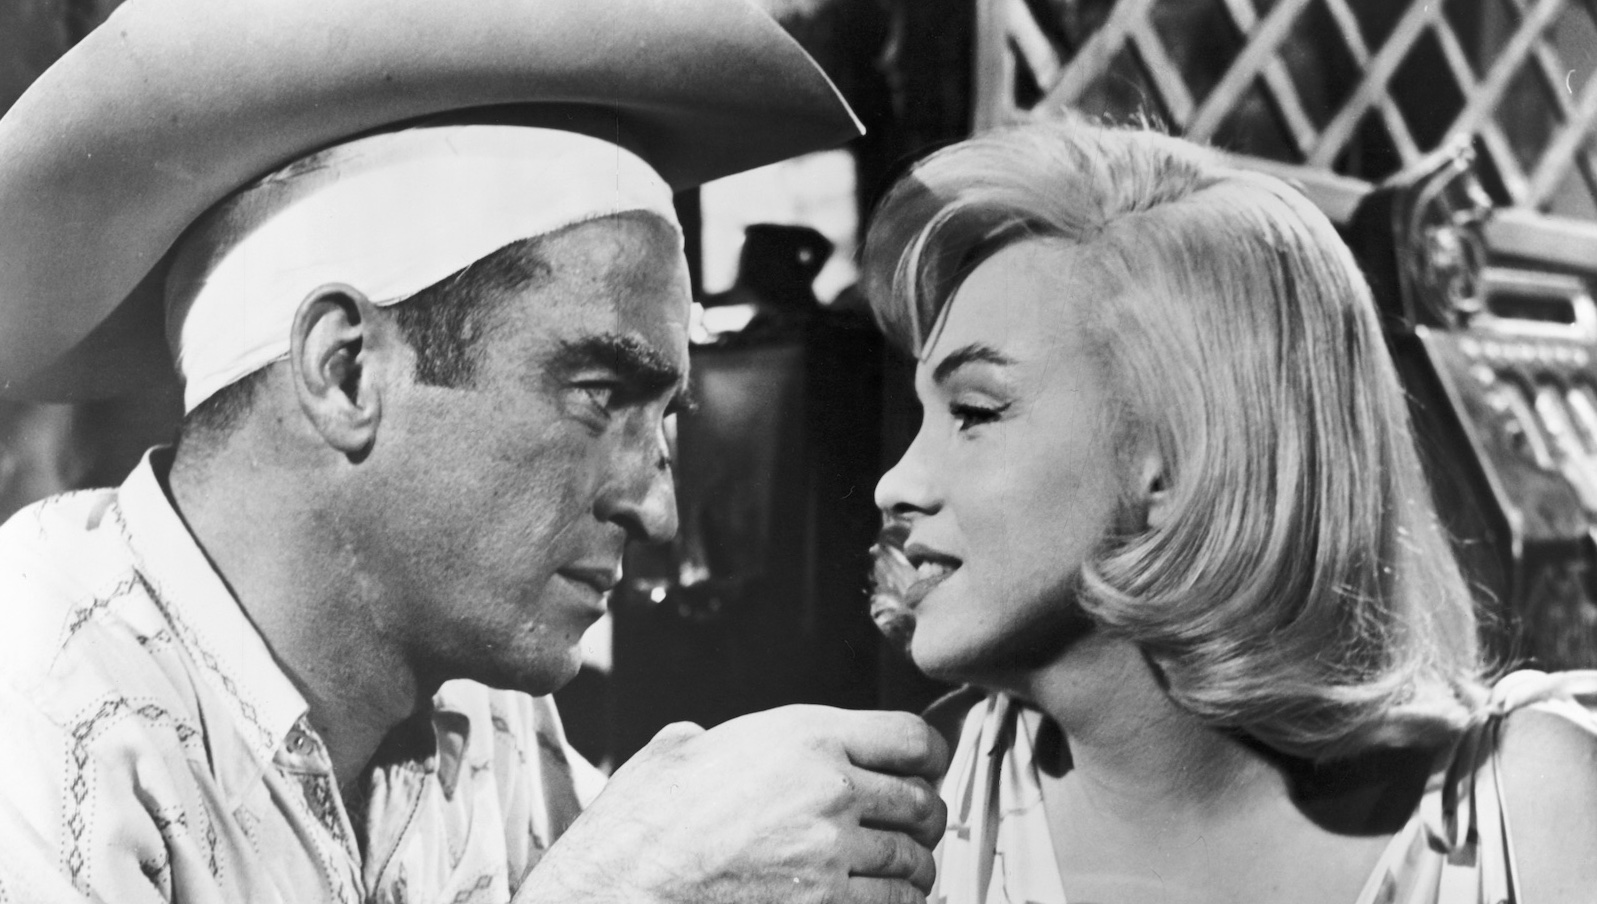 Black and white shot of a man and woman looking at each other in close up. He wears a cowboy hat